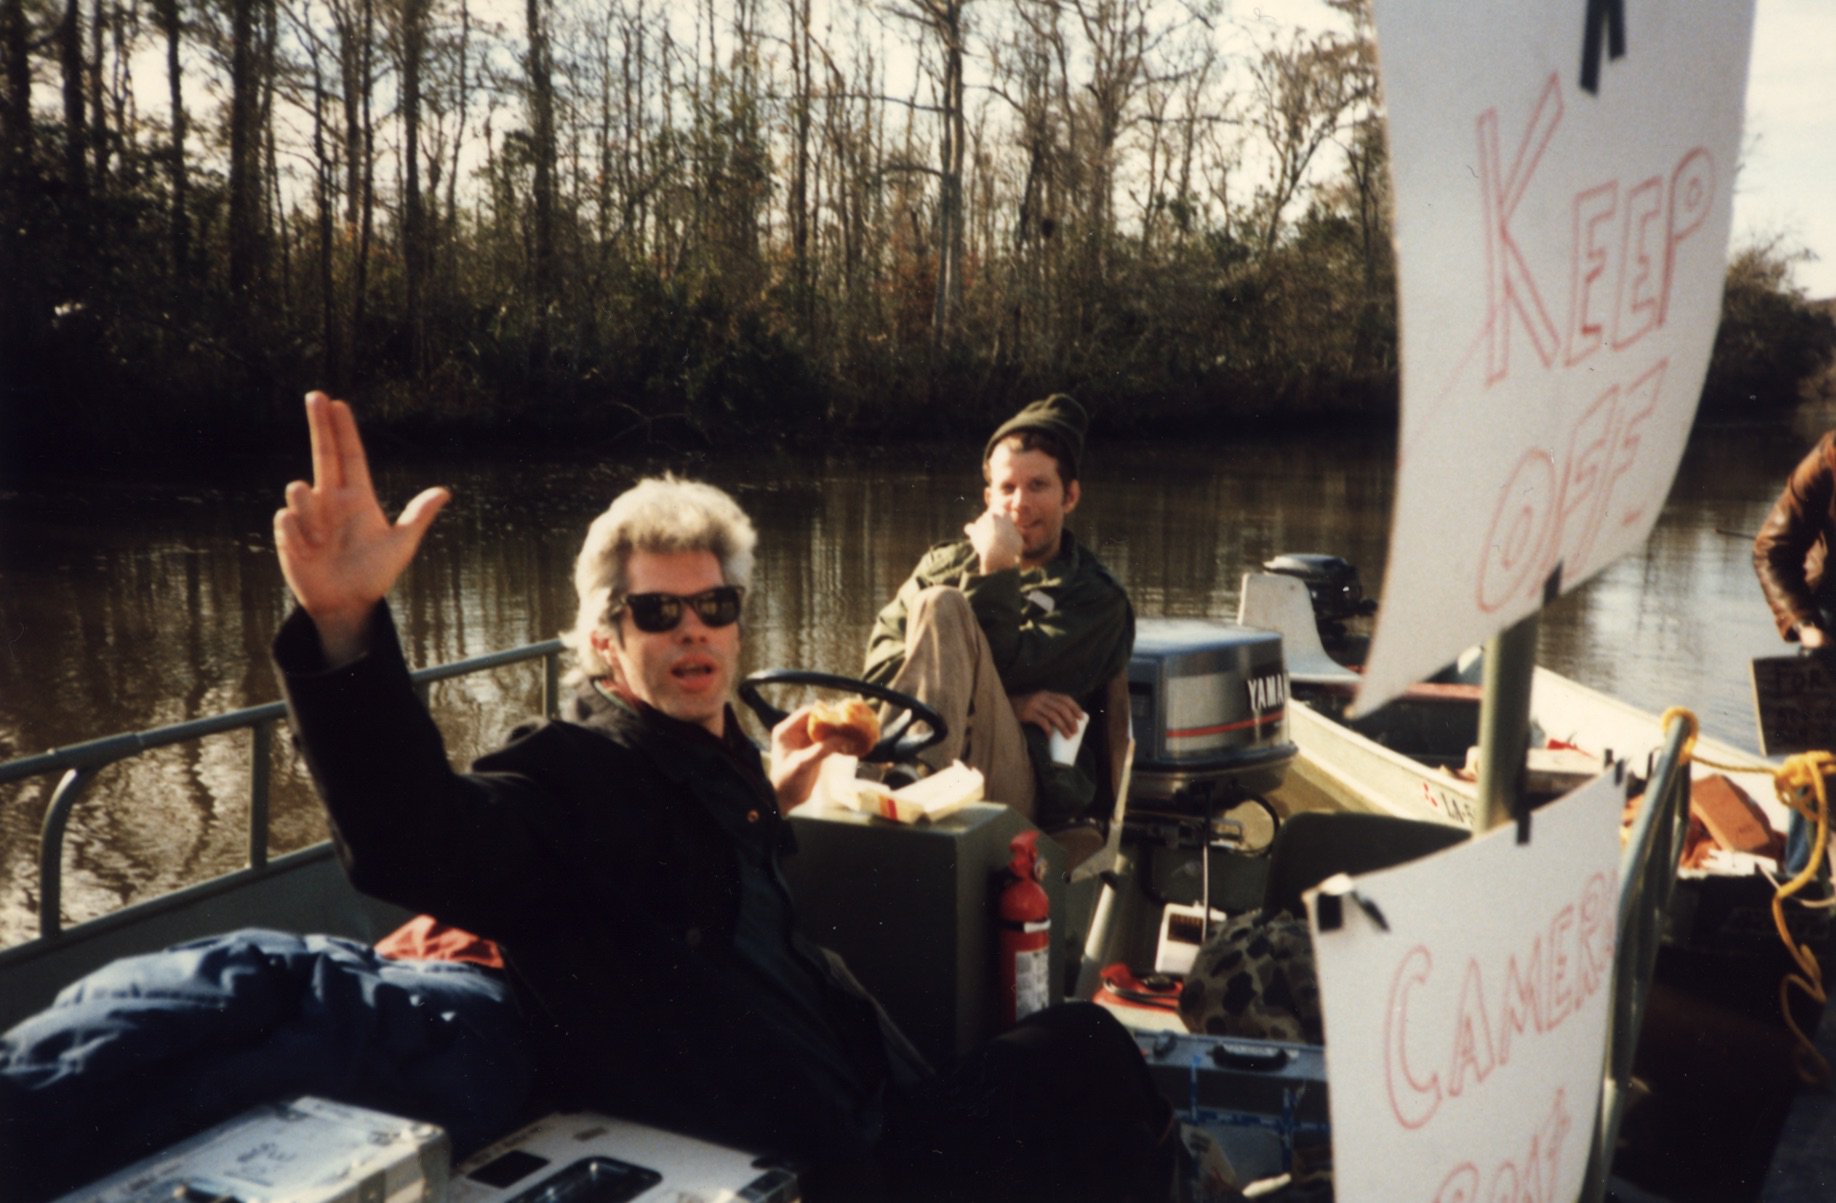 Wishing a very happy birthday to the one and only Jim Jarmusch! 